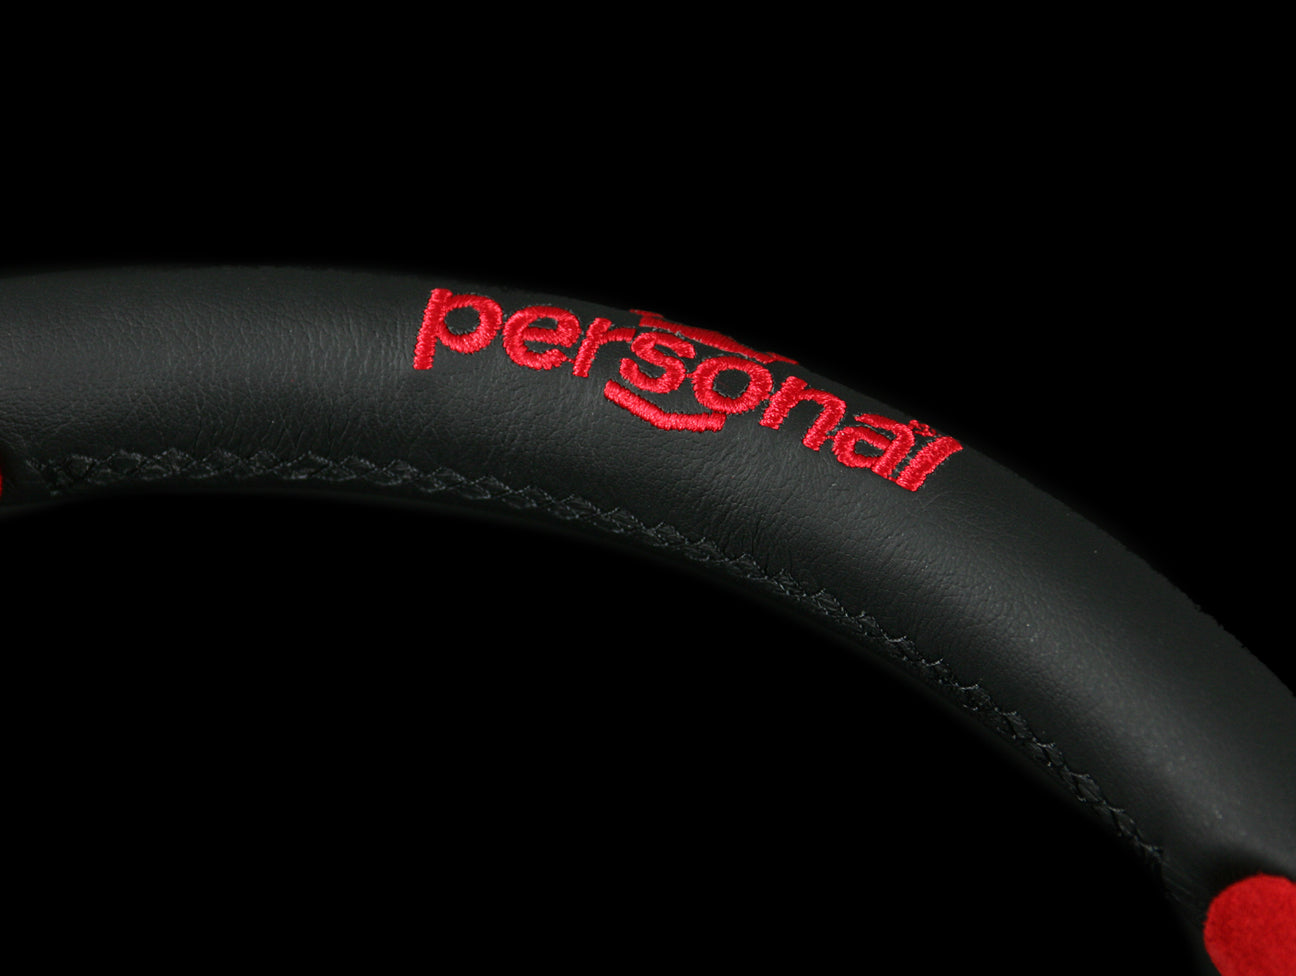 Personal Pole Position 350mm Steering Wheel - Black & Red Leather